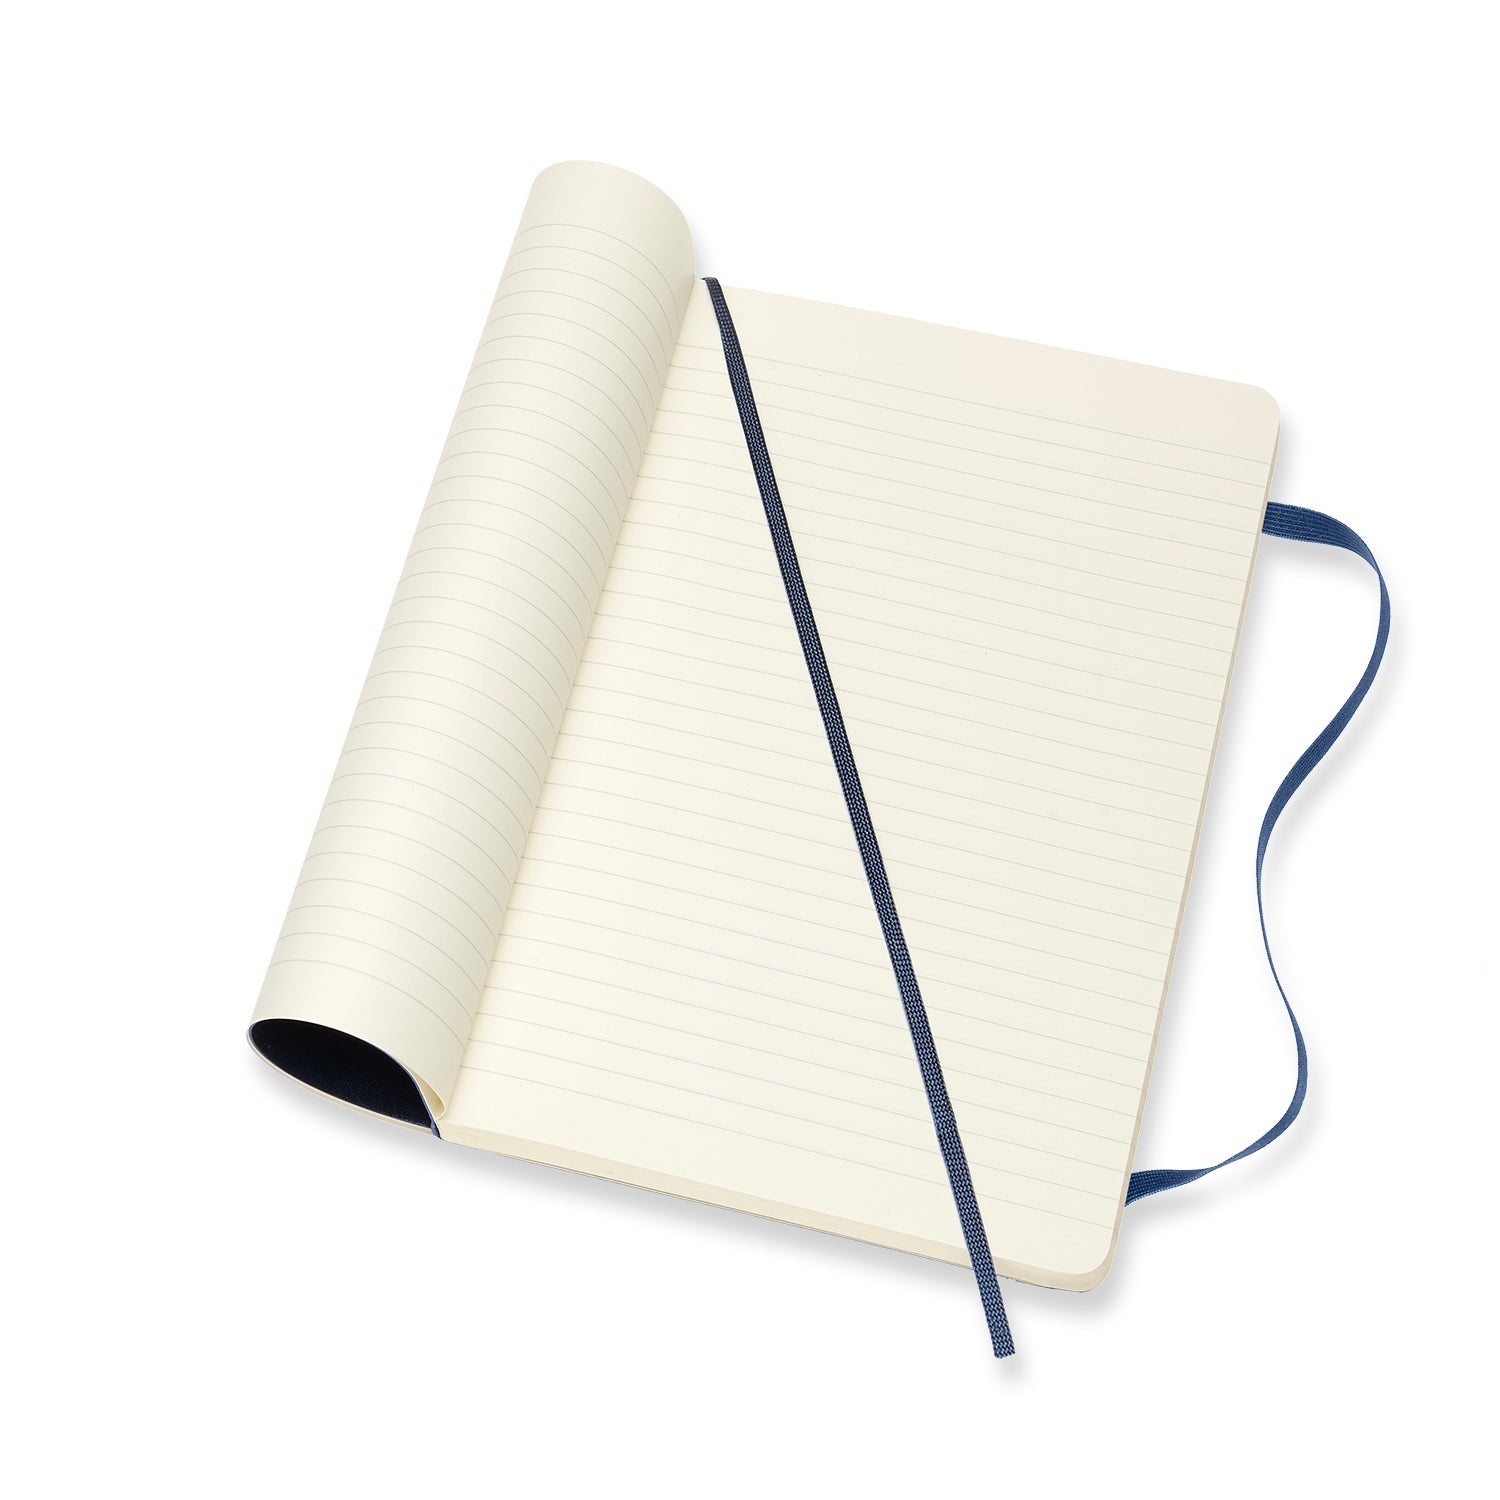 Moleskine notebook softcover large lined sapphire blue